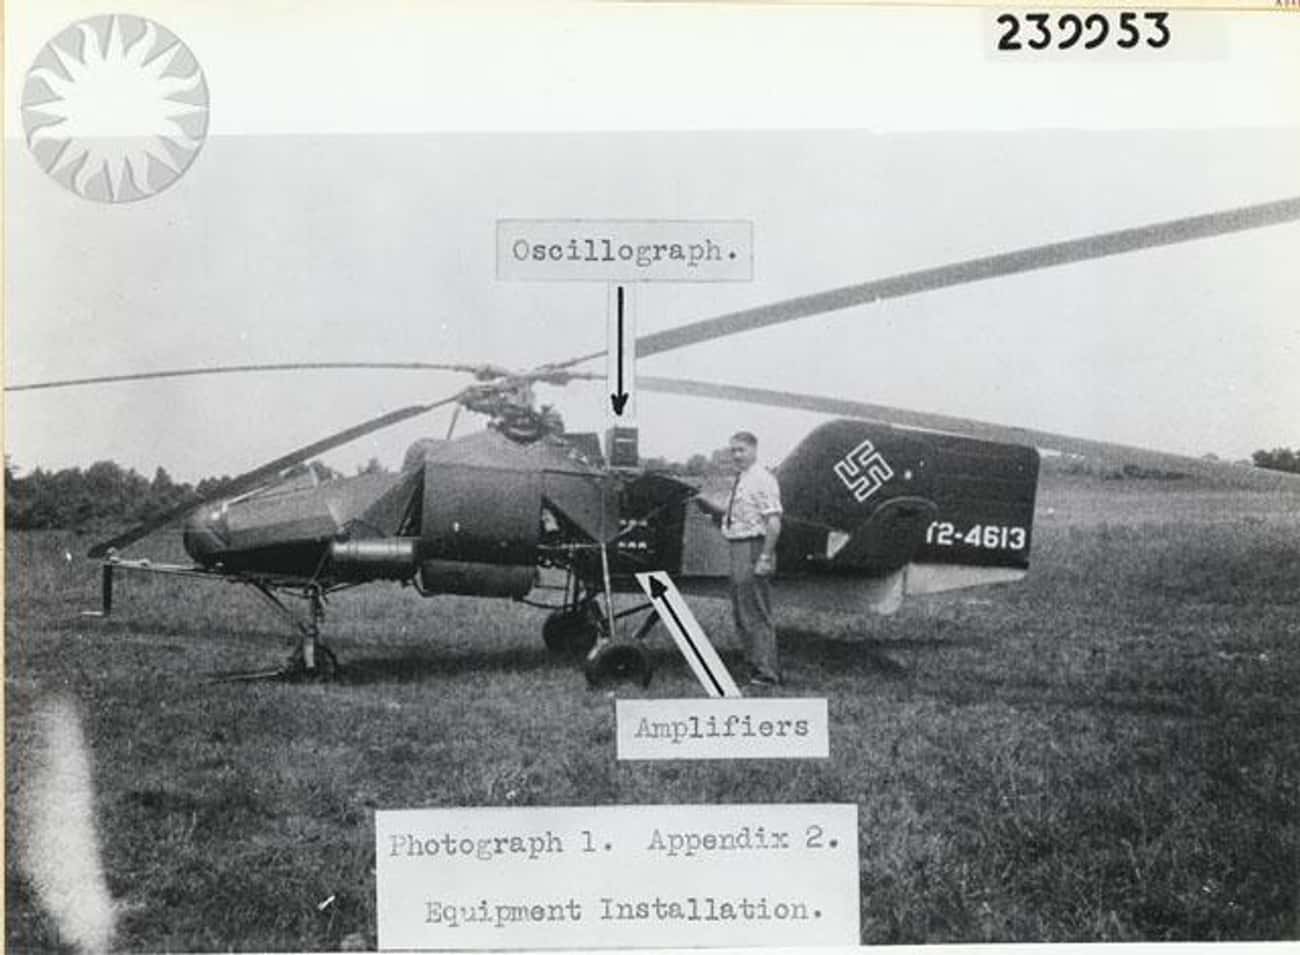 The World's First Mass-Produced Helicopter